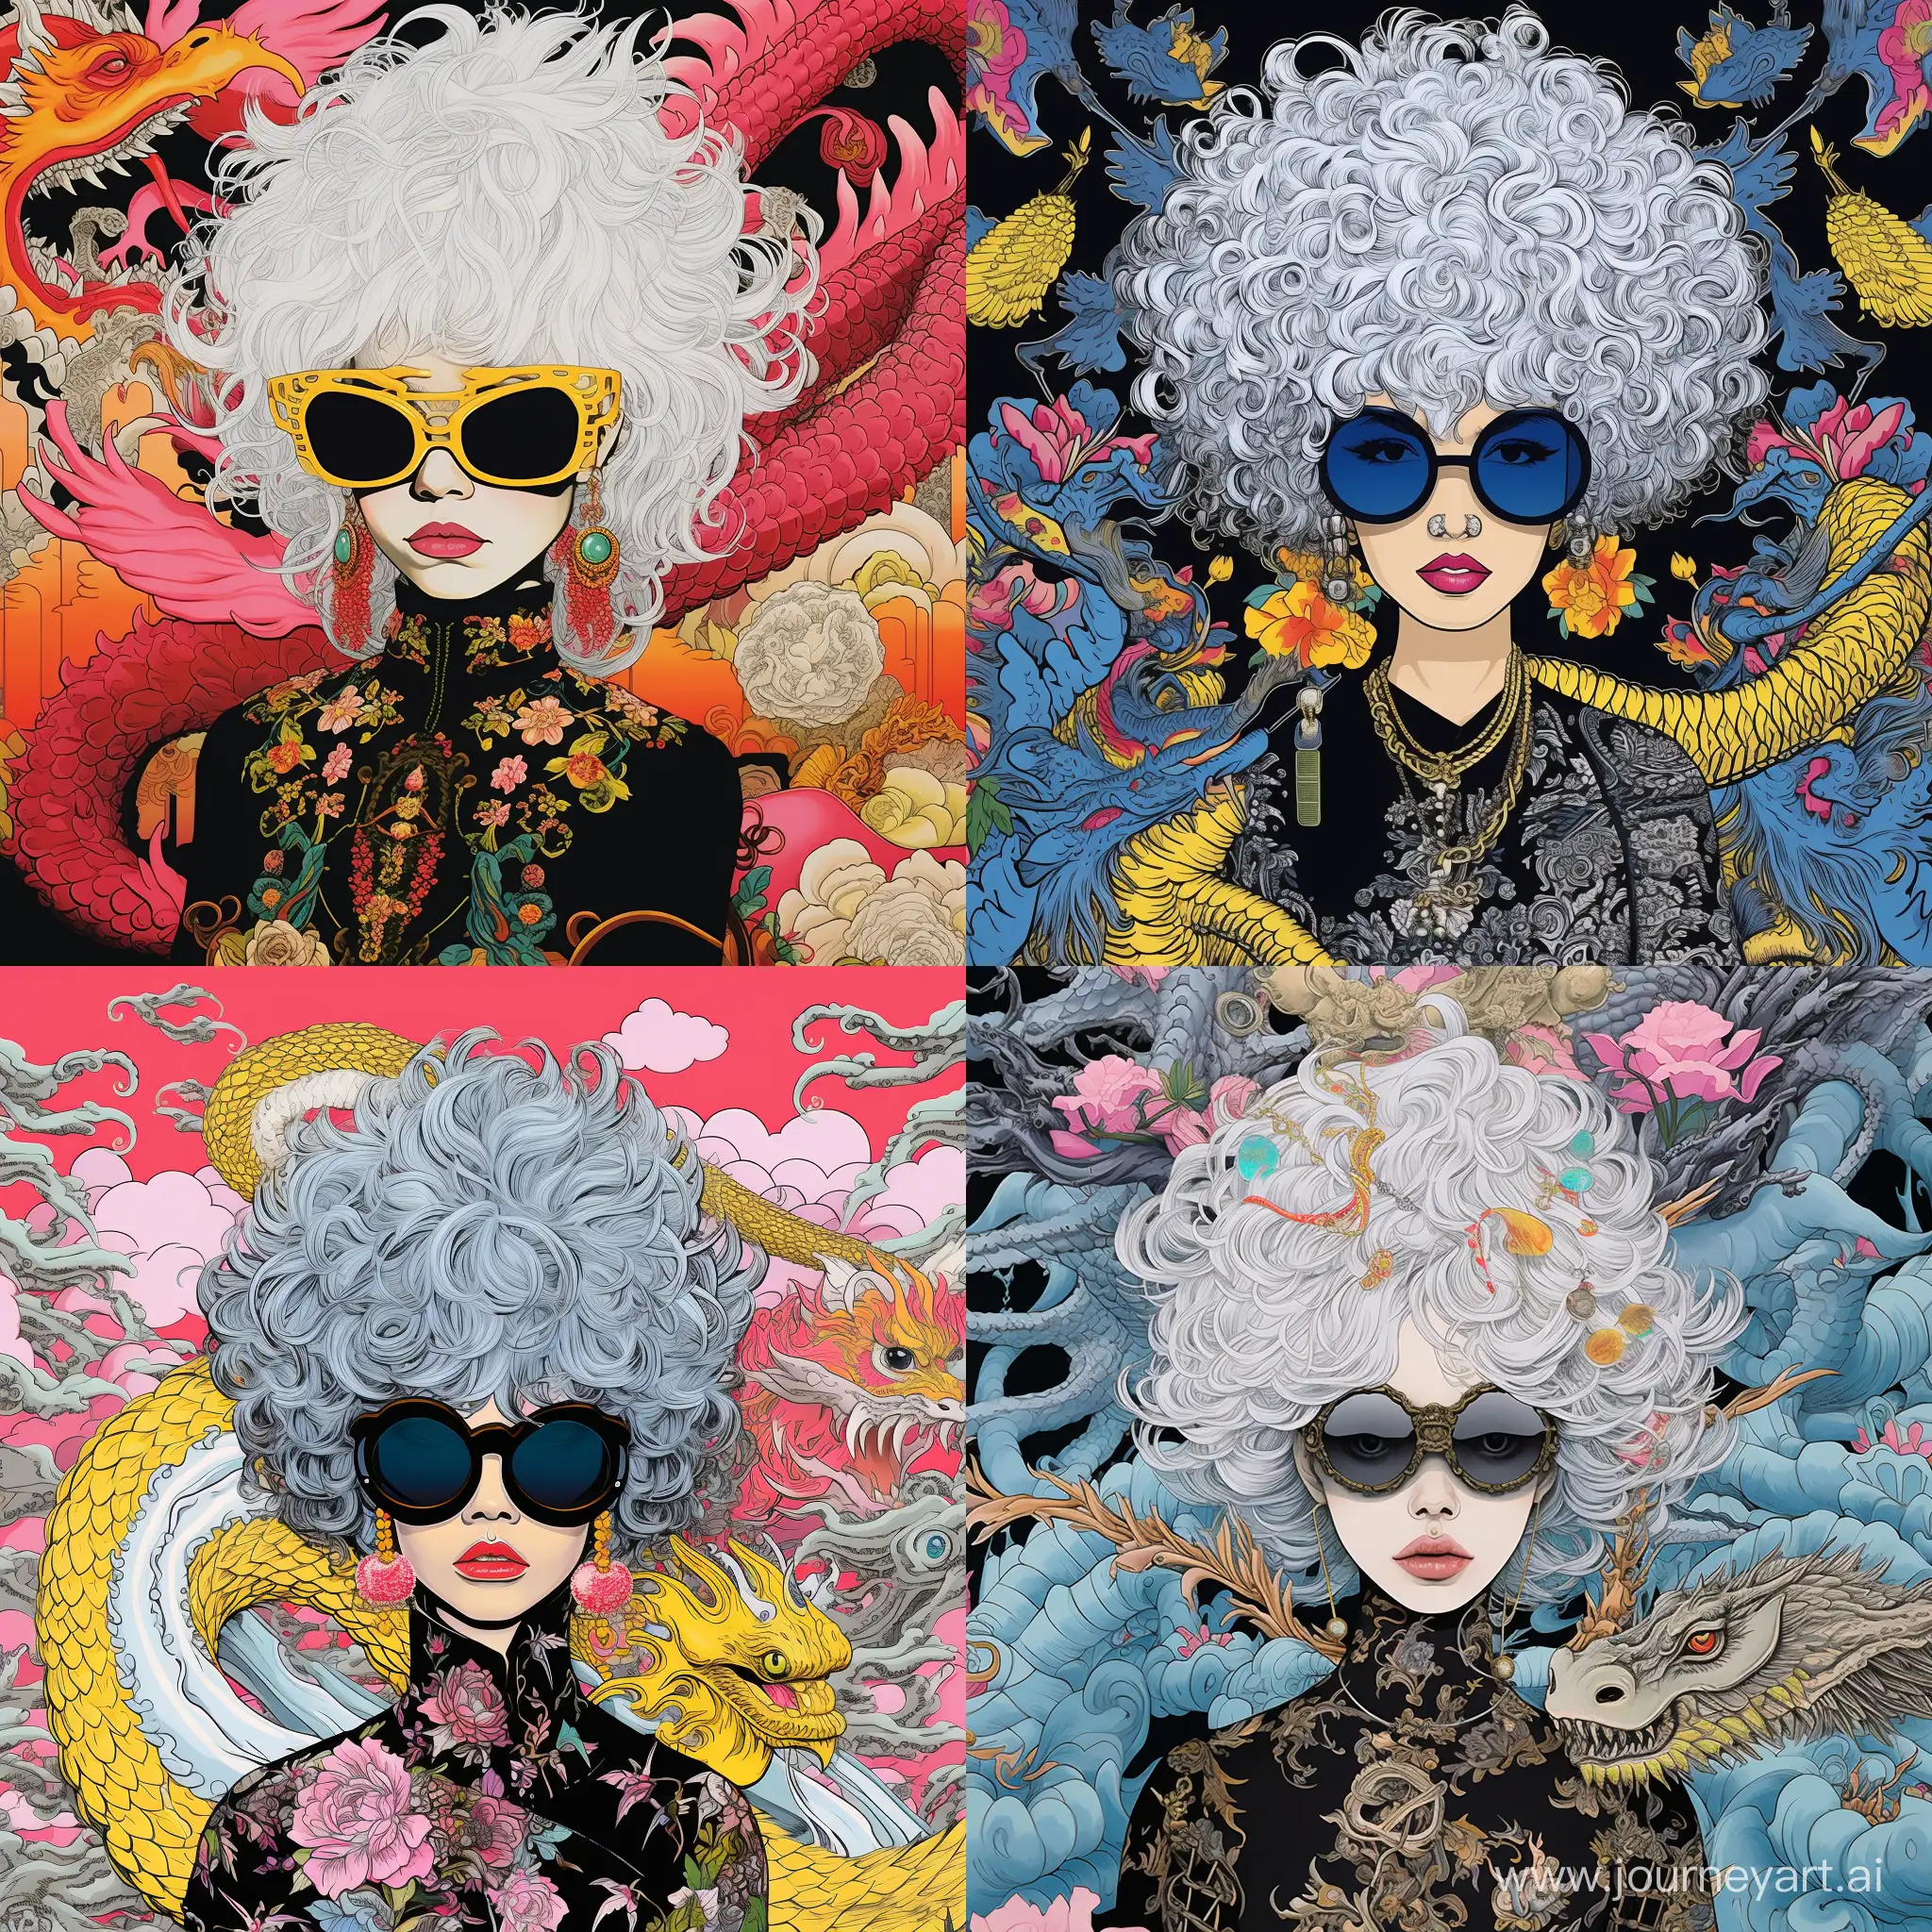 Rococo style Dragon Empress Dragon with small round sunglasses, Michael DeForge & Julie Doucet & Philippe Druillet & Kaethe Butcher mixed styles